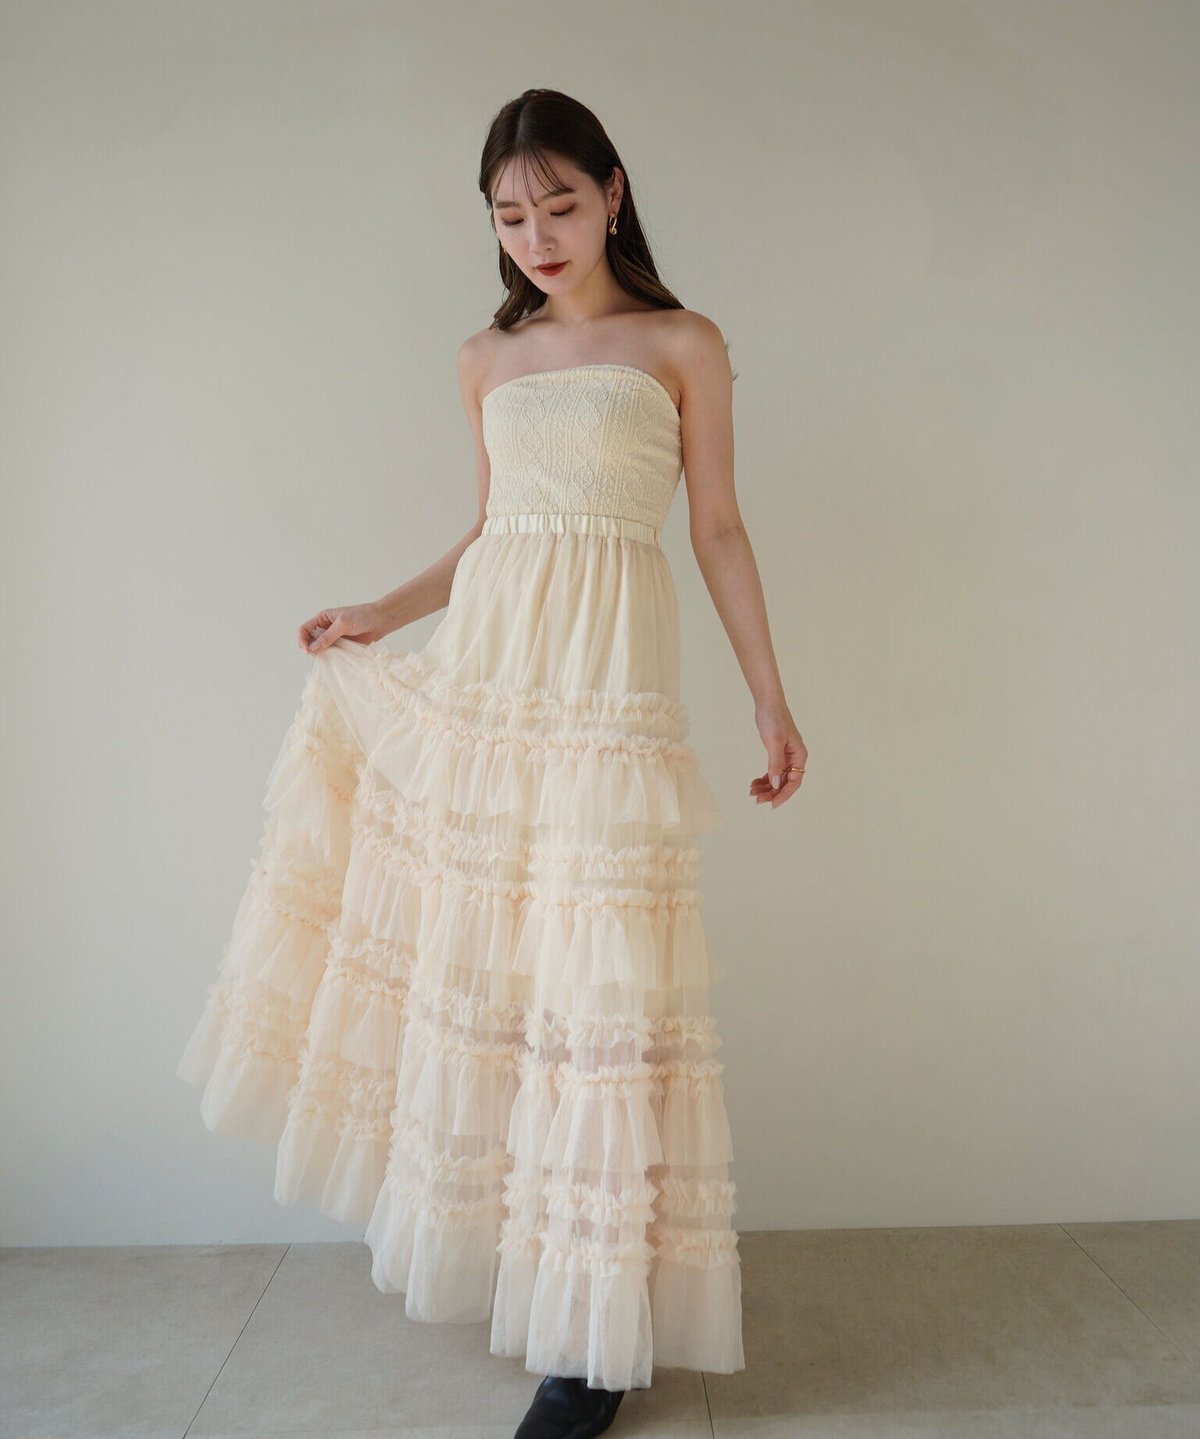 acka tulle long skirt (ivory)少し検討しますね